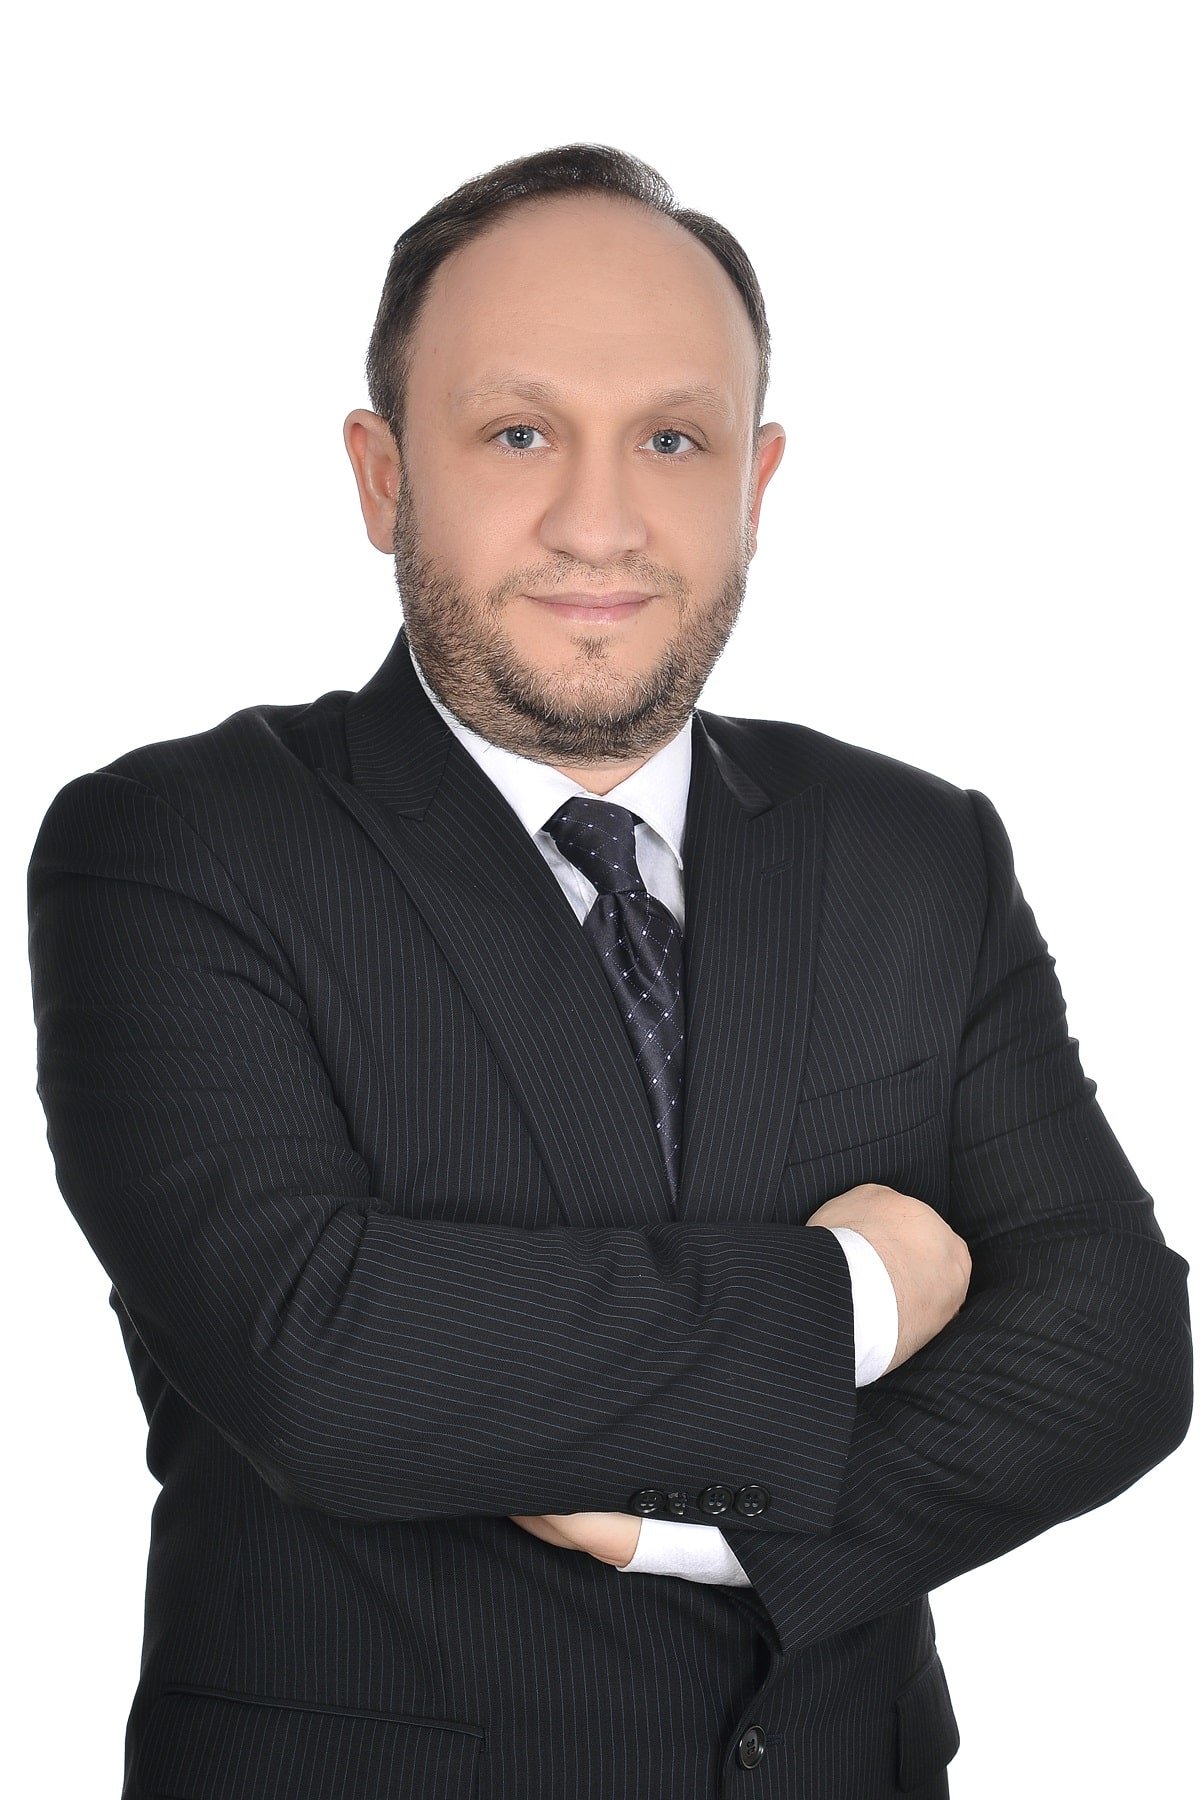 Dr. Mohamad Istanboli